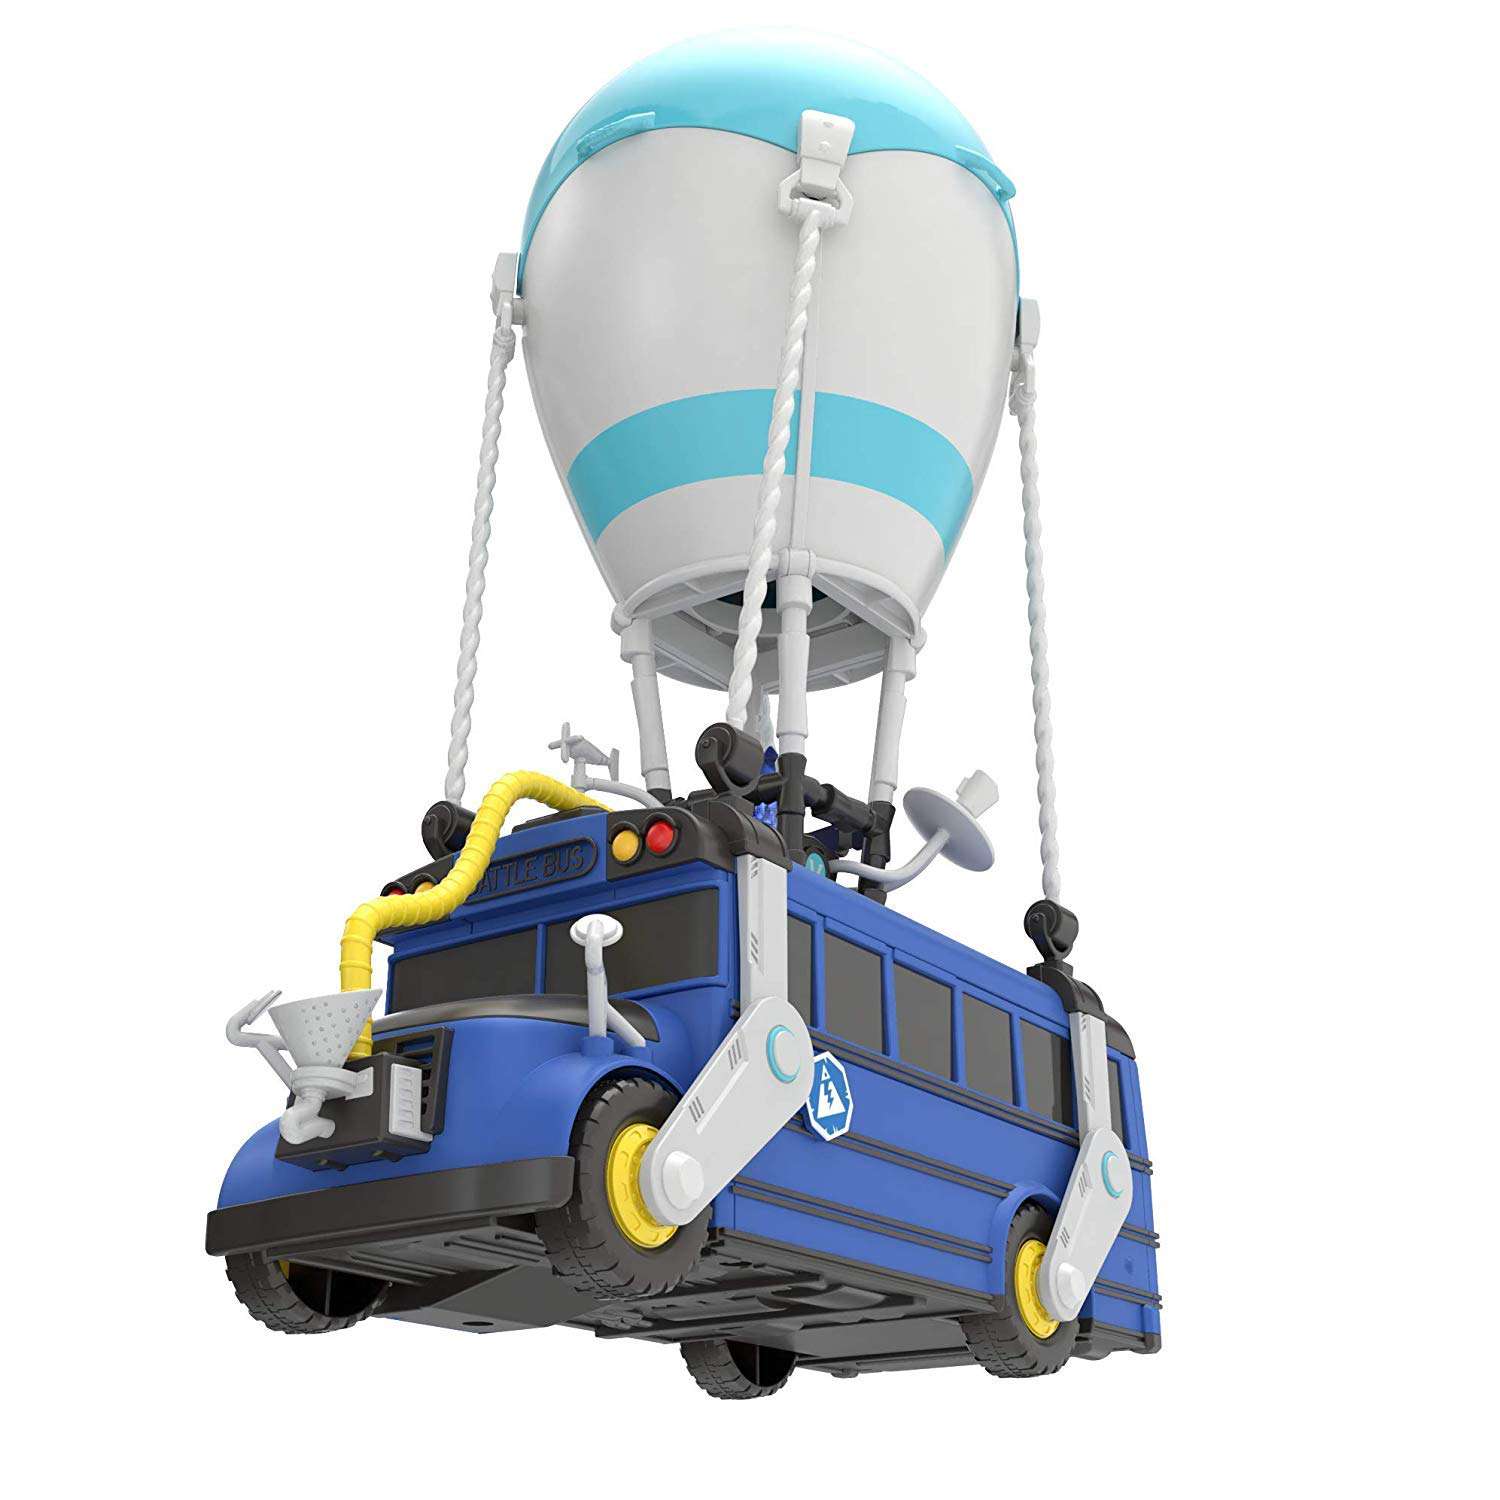 Fortnite Battle Royale 13" Battle Bus, with 2 Exclusive Mini Figures - image 3 of 5